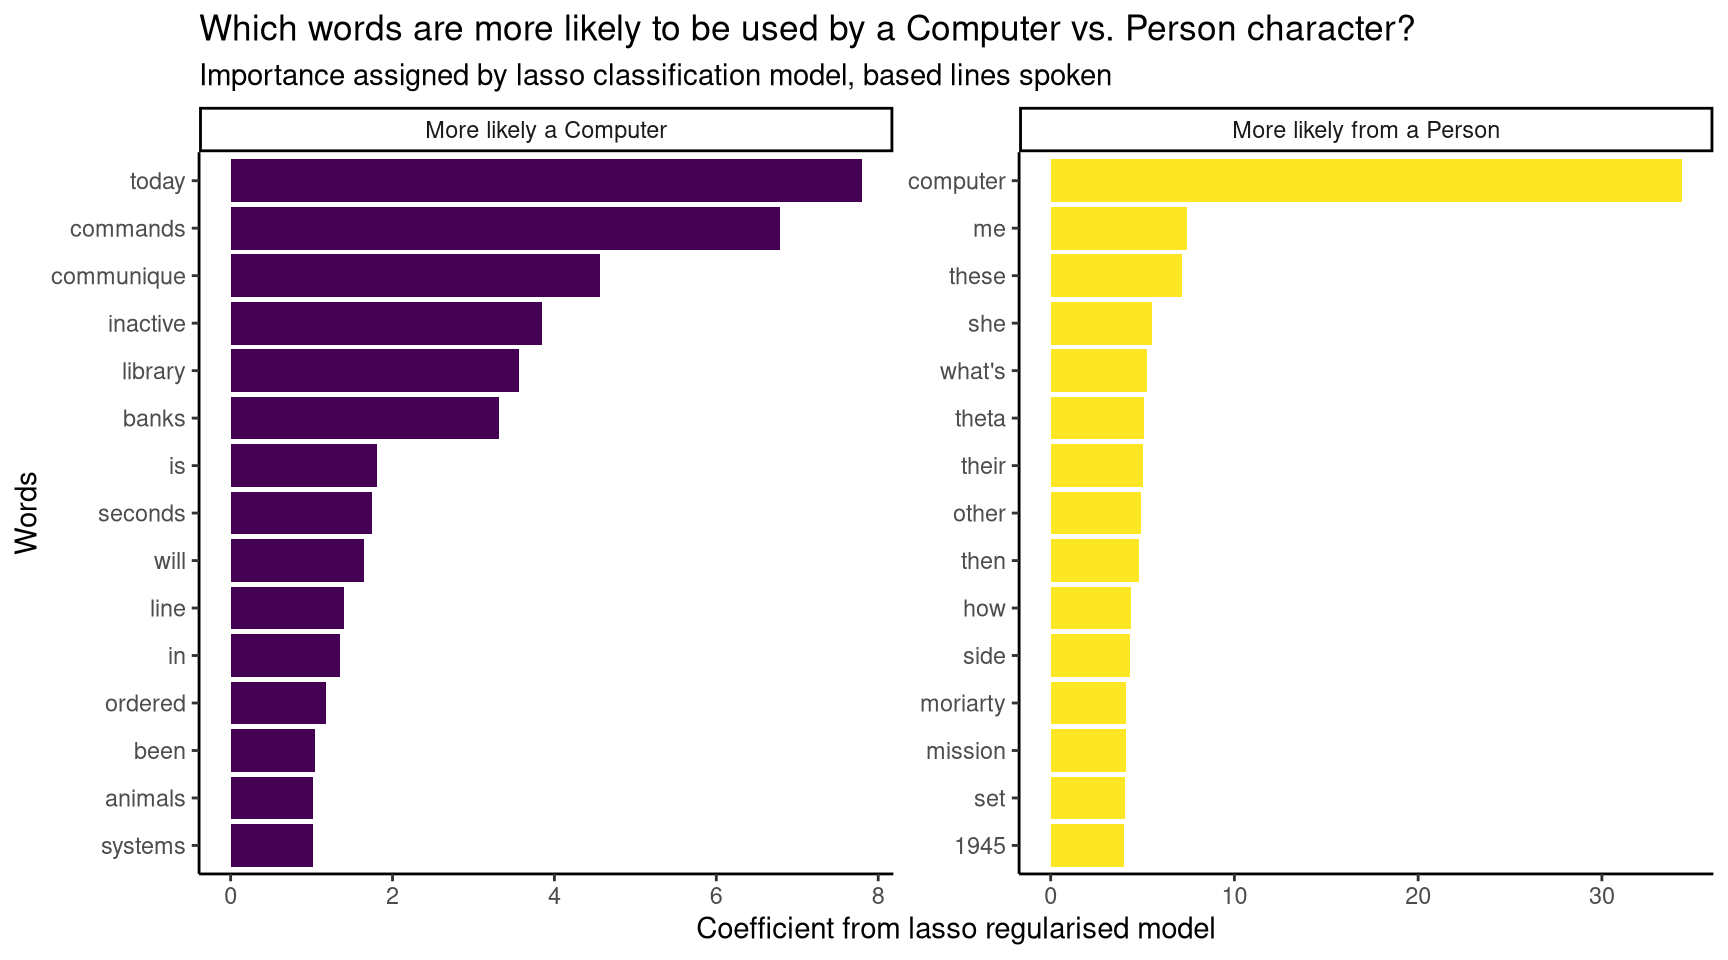 The model's most important word for classifying `Person` characters was `computer`.